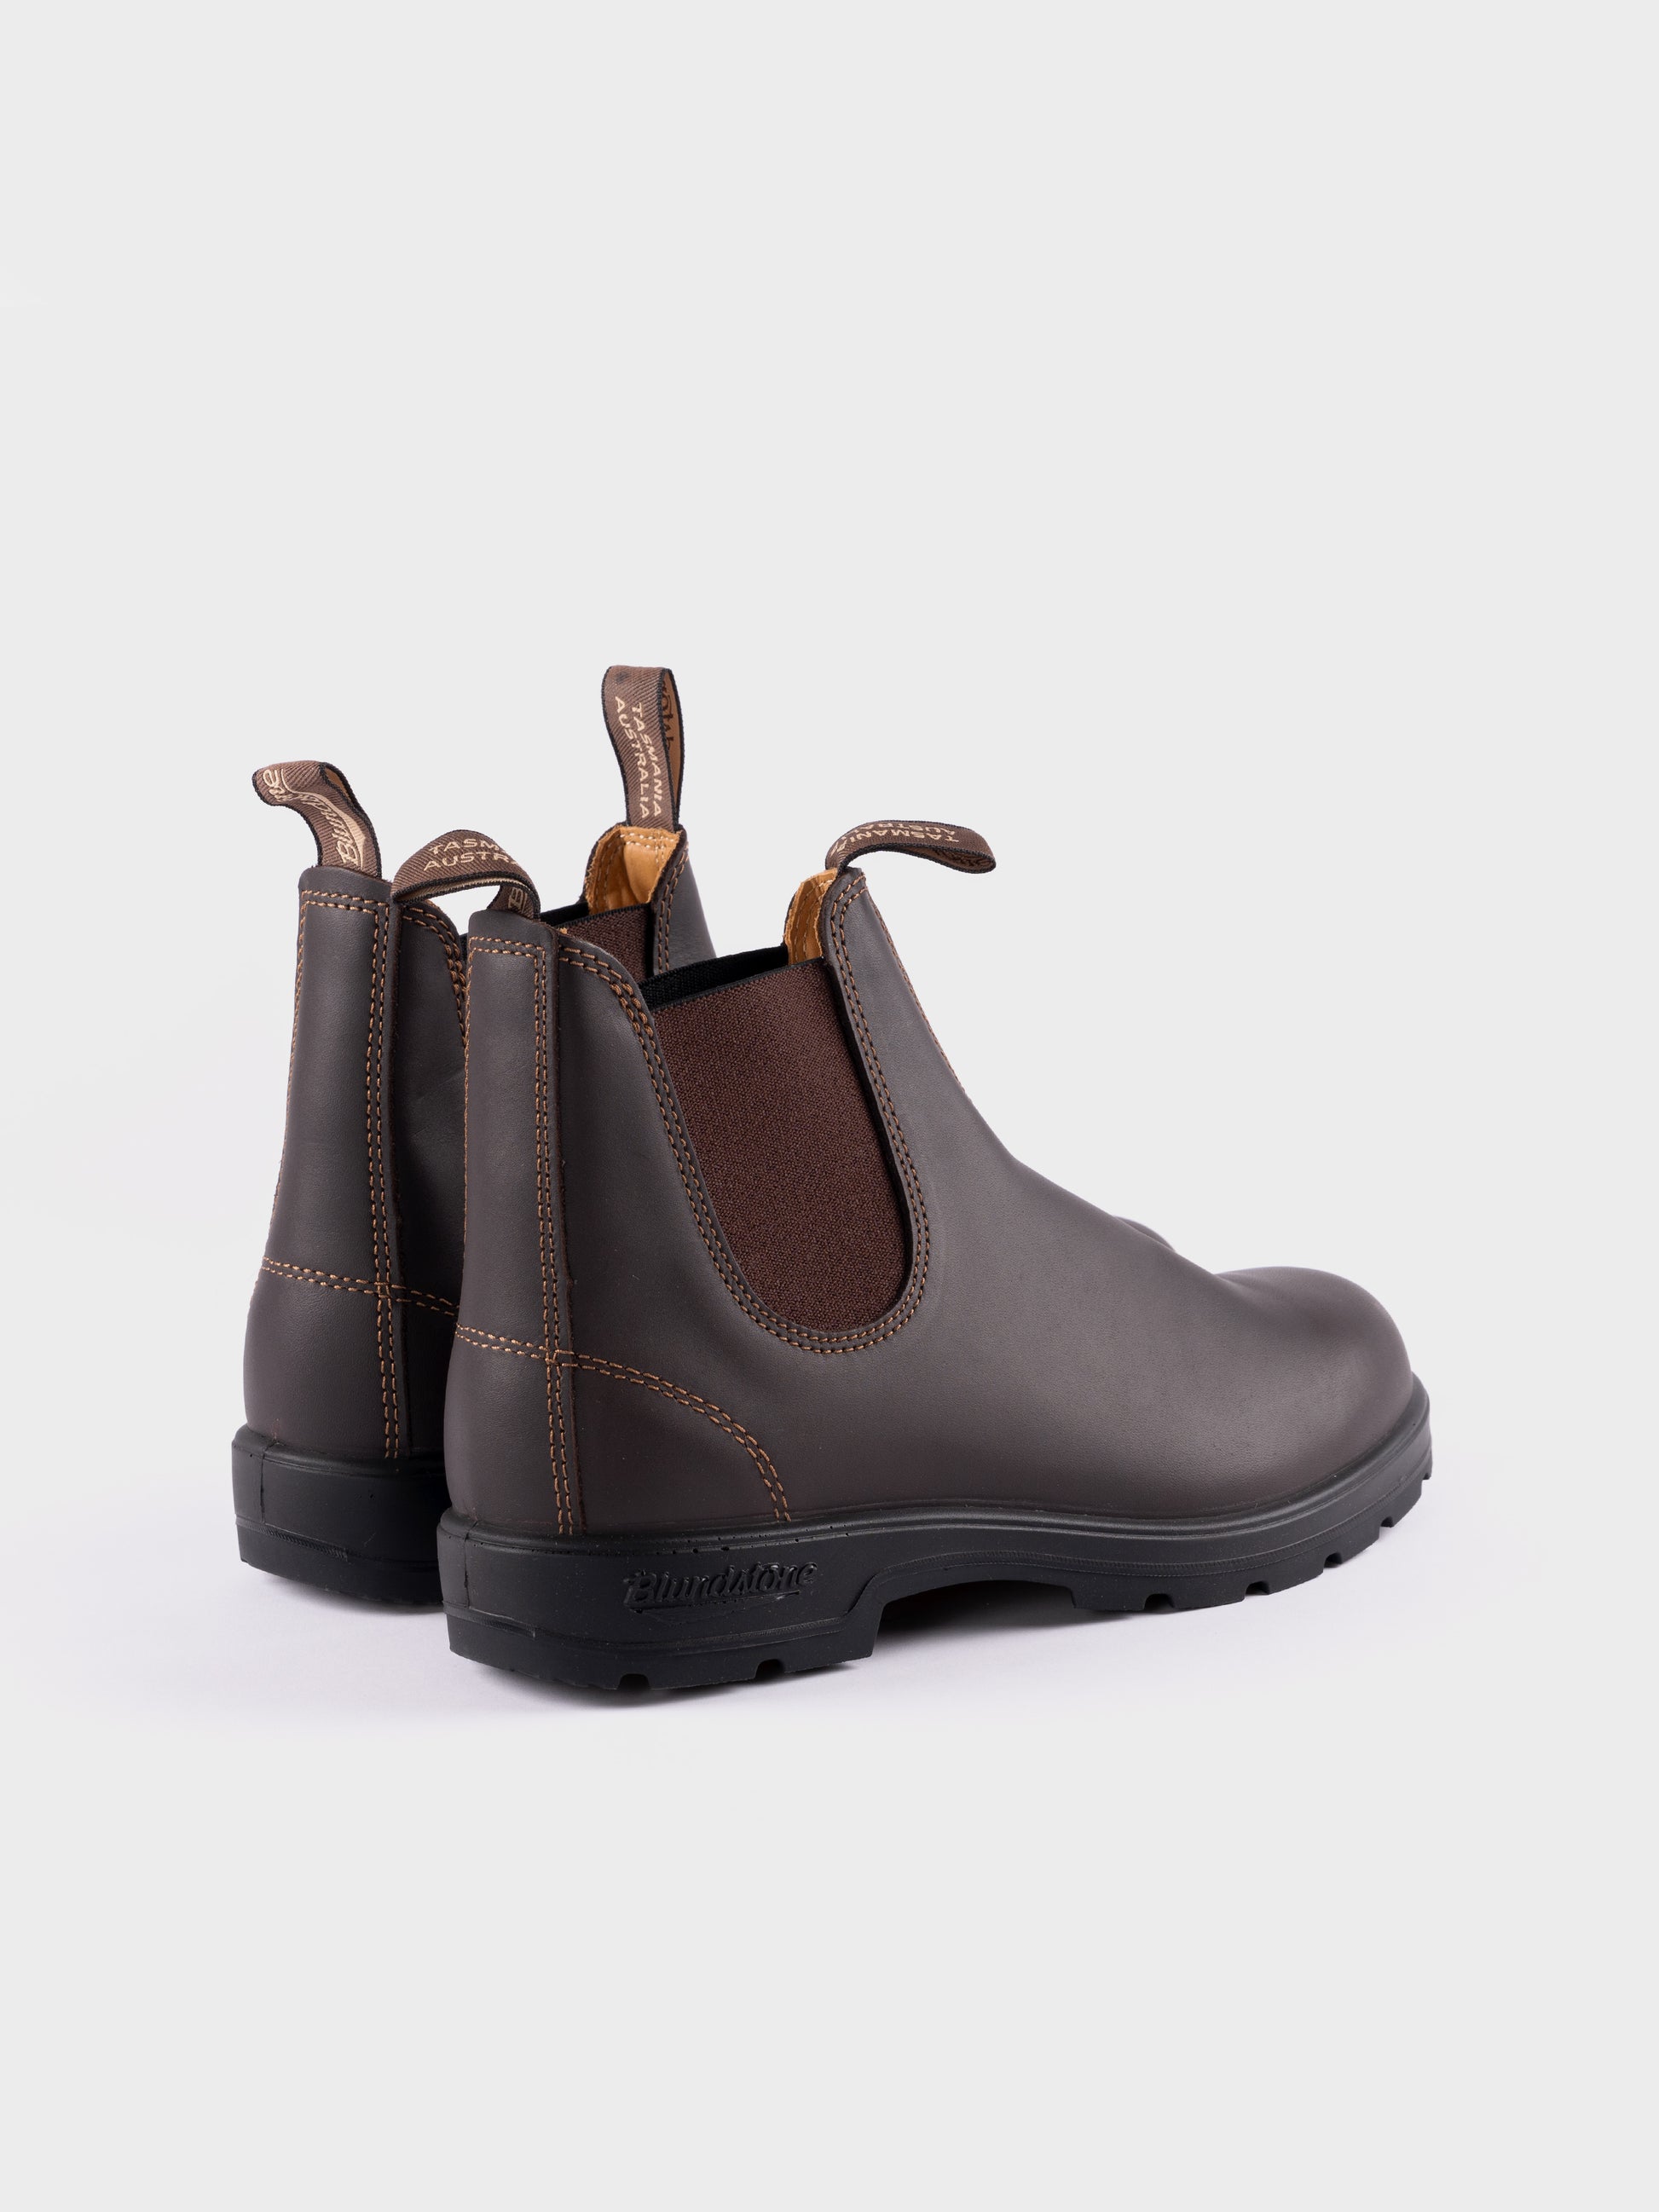 Blundstone Boots - 550 - Walnut Brown Leather